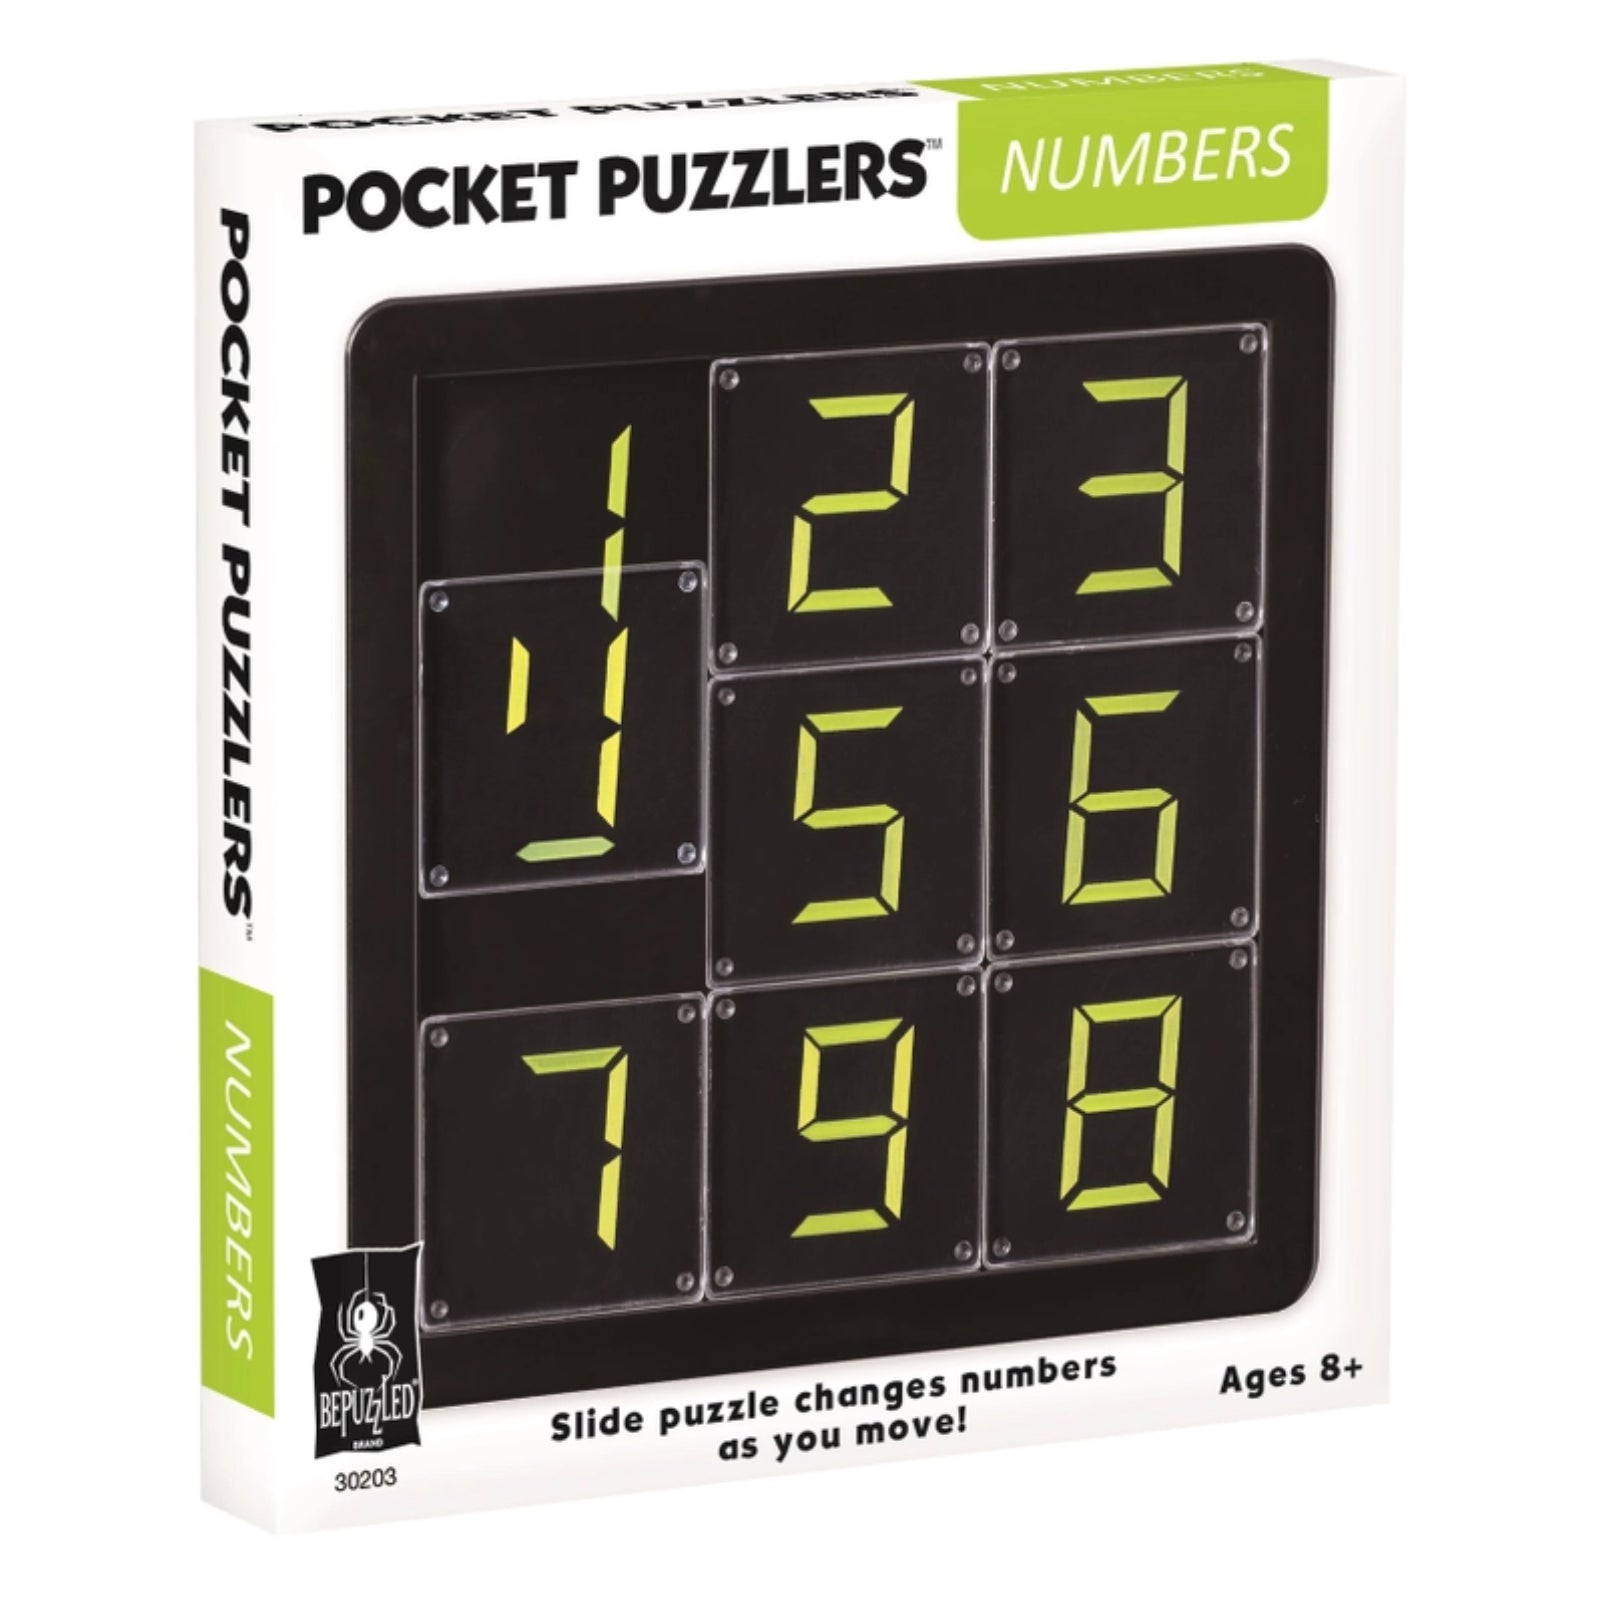 Pocket Puzzlers - Numbers - Bepuzzled